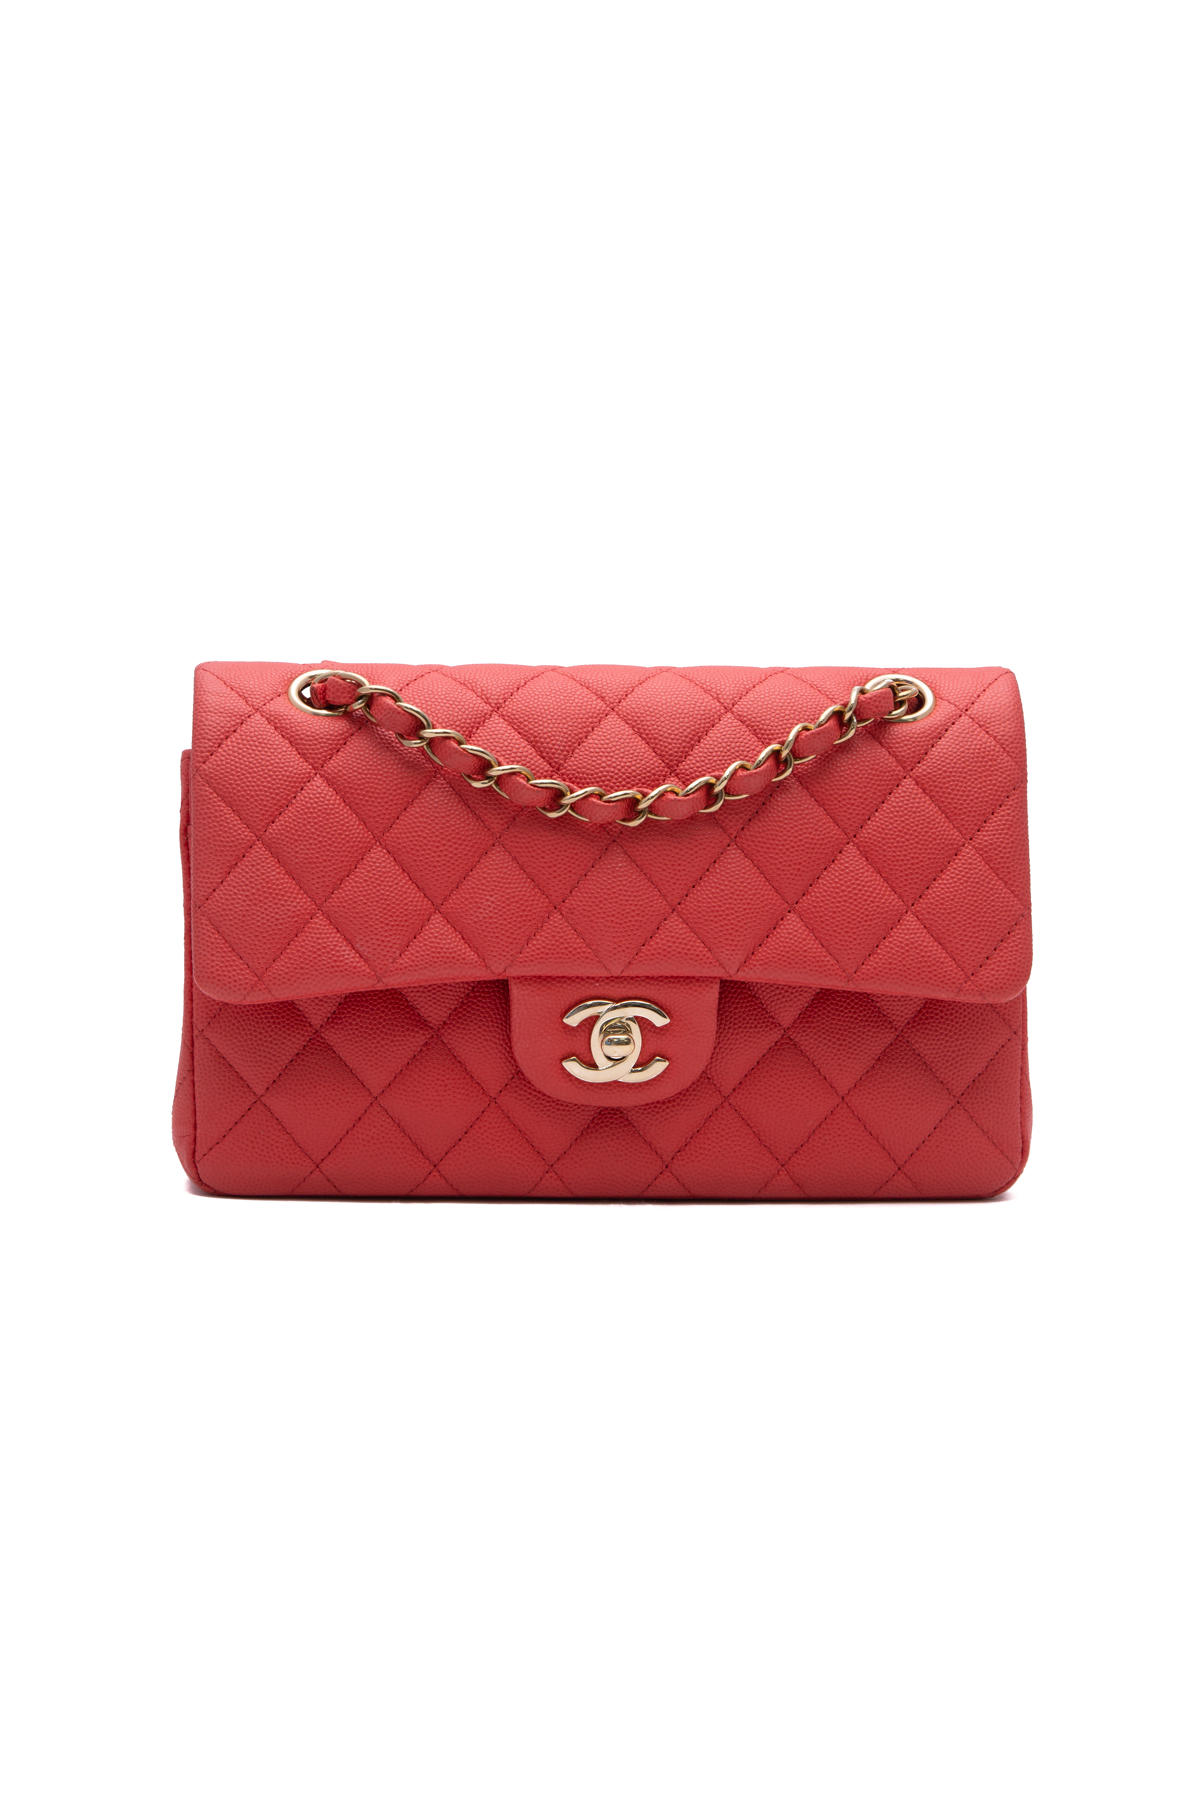 Chanel Classic Small Double Flap Bag - Couture USA